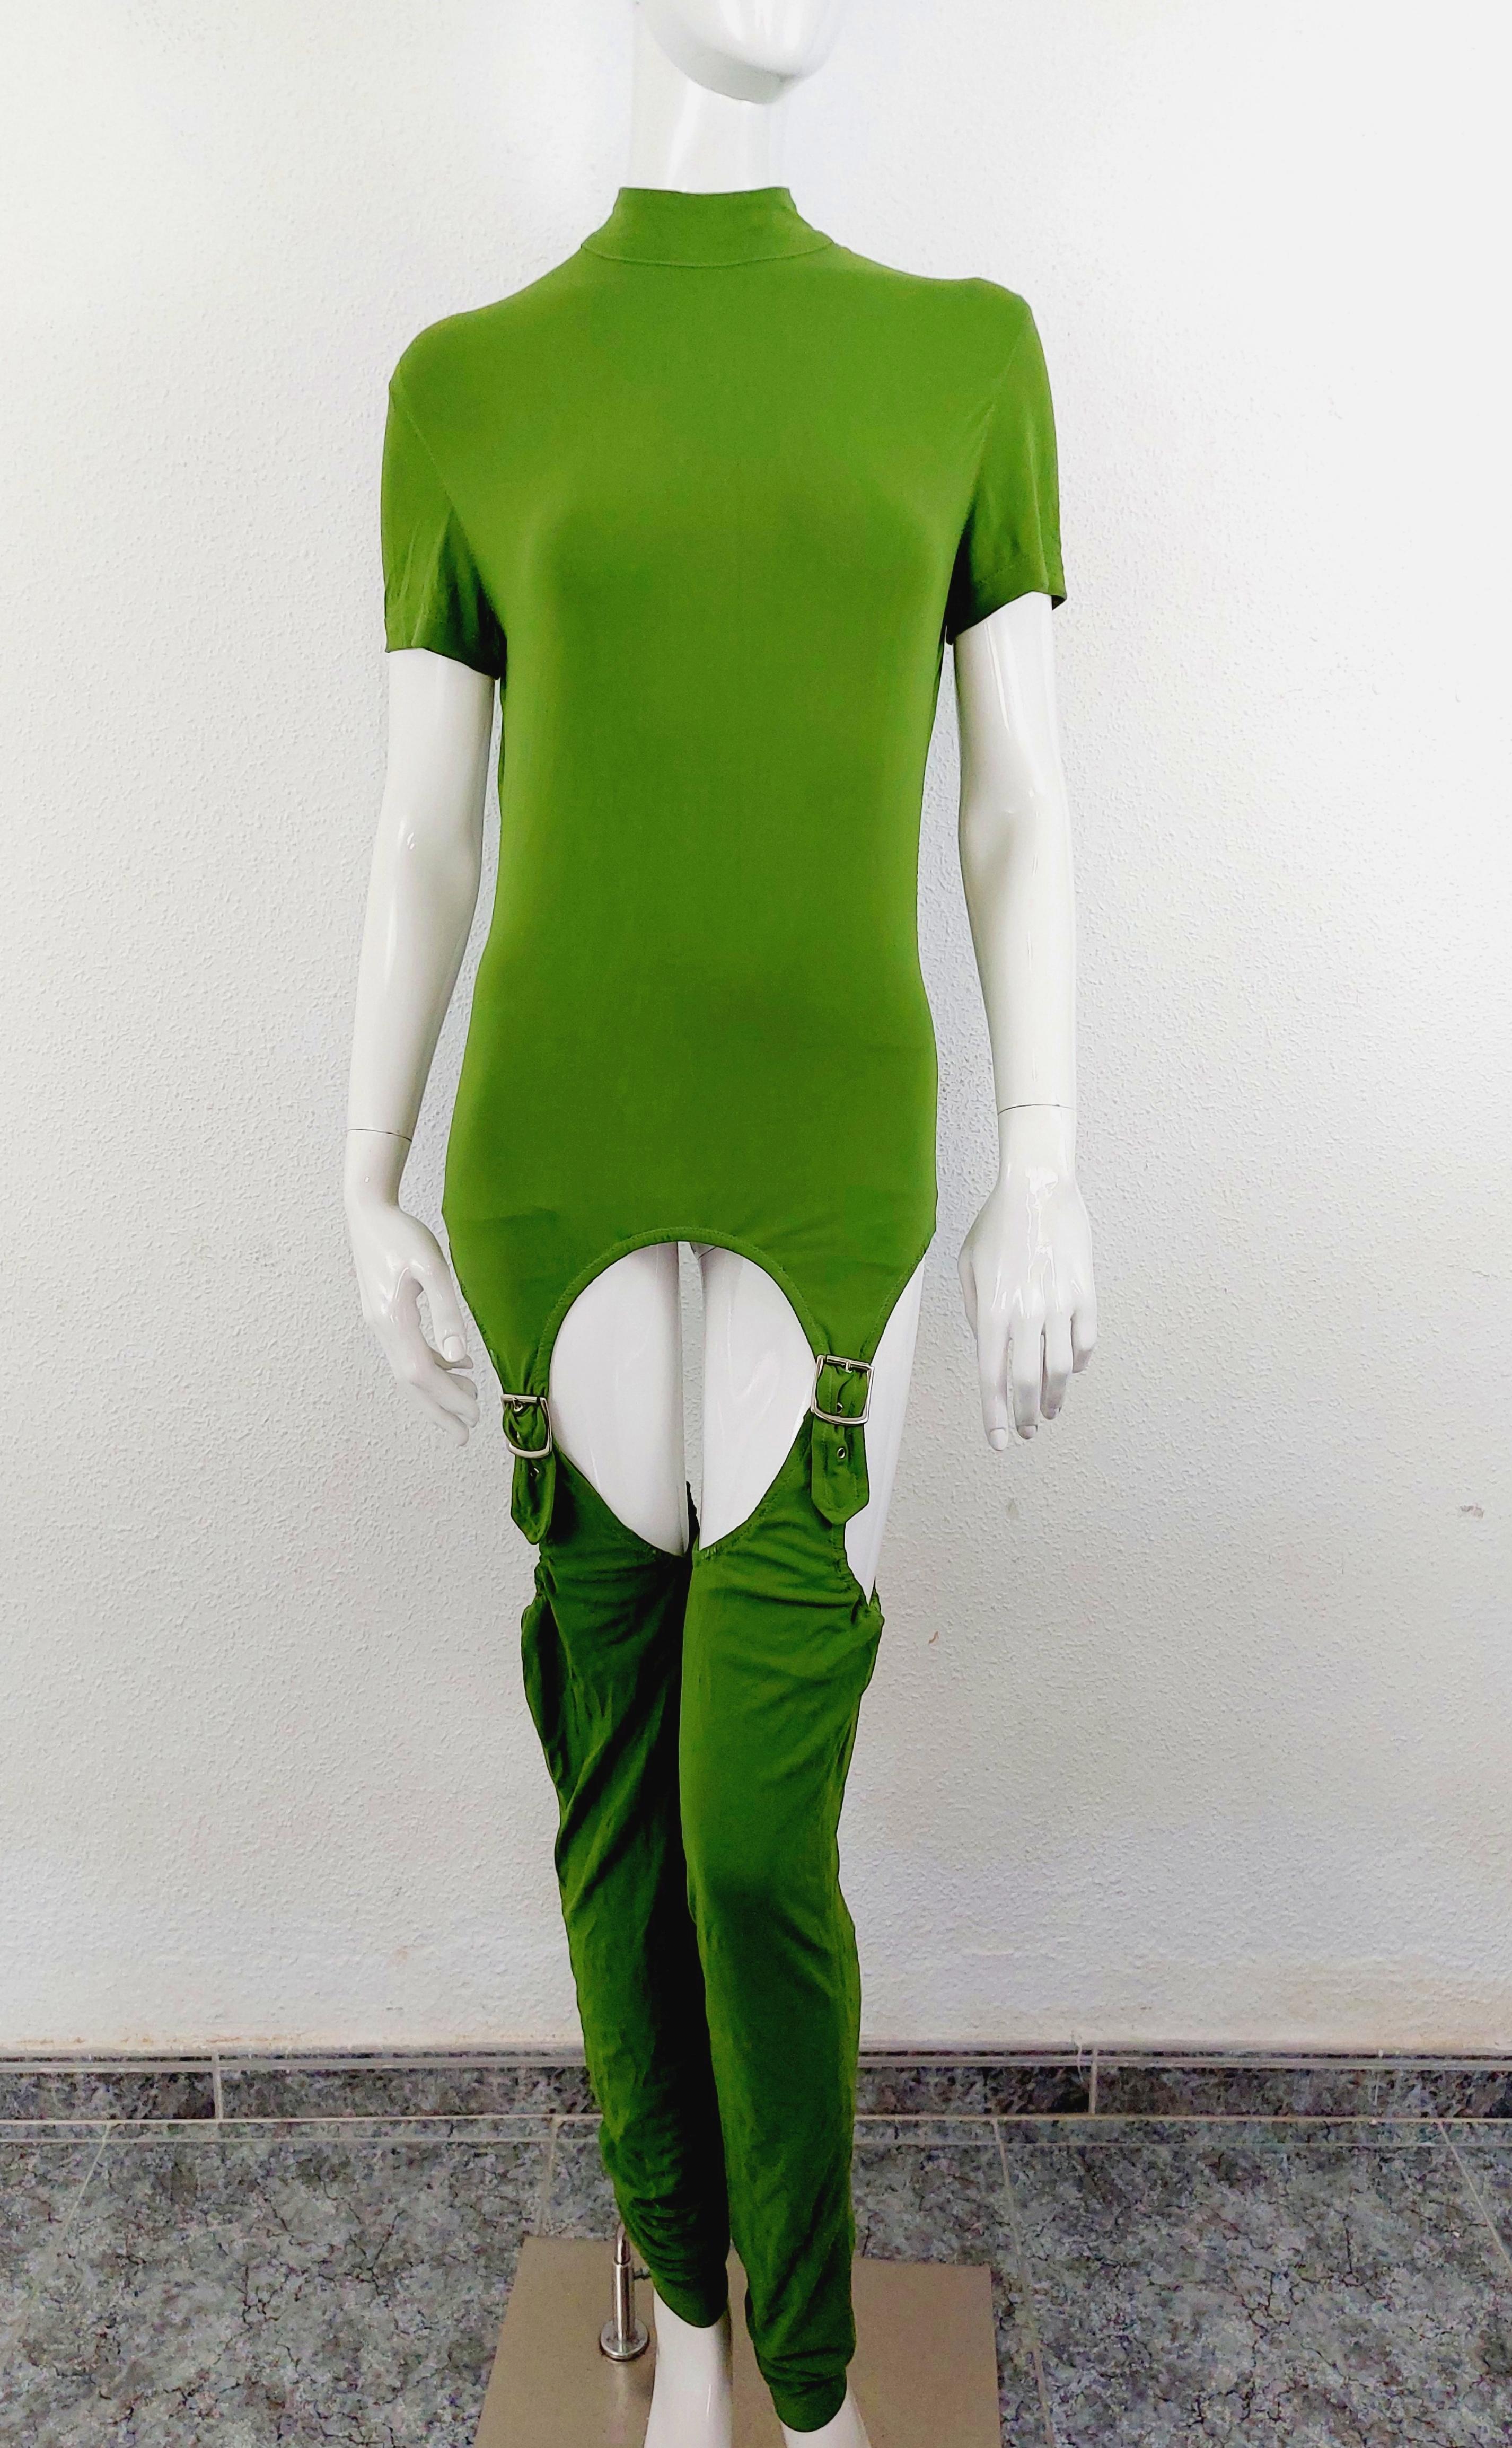 Jean Paul Gaultier Runway 1998 SS Maniacs’ Collection Green Cutout Nude Kinky Open Genitals Drag Bodysuit Anorak Suit

Unique cut out bodysuit with adjustable leg warmers, from the 1992 Maniac’s Collection.
Collector/Museum Piece.

Very good